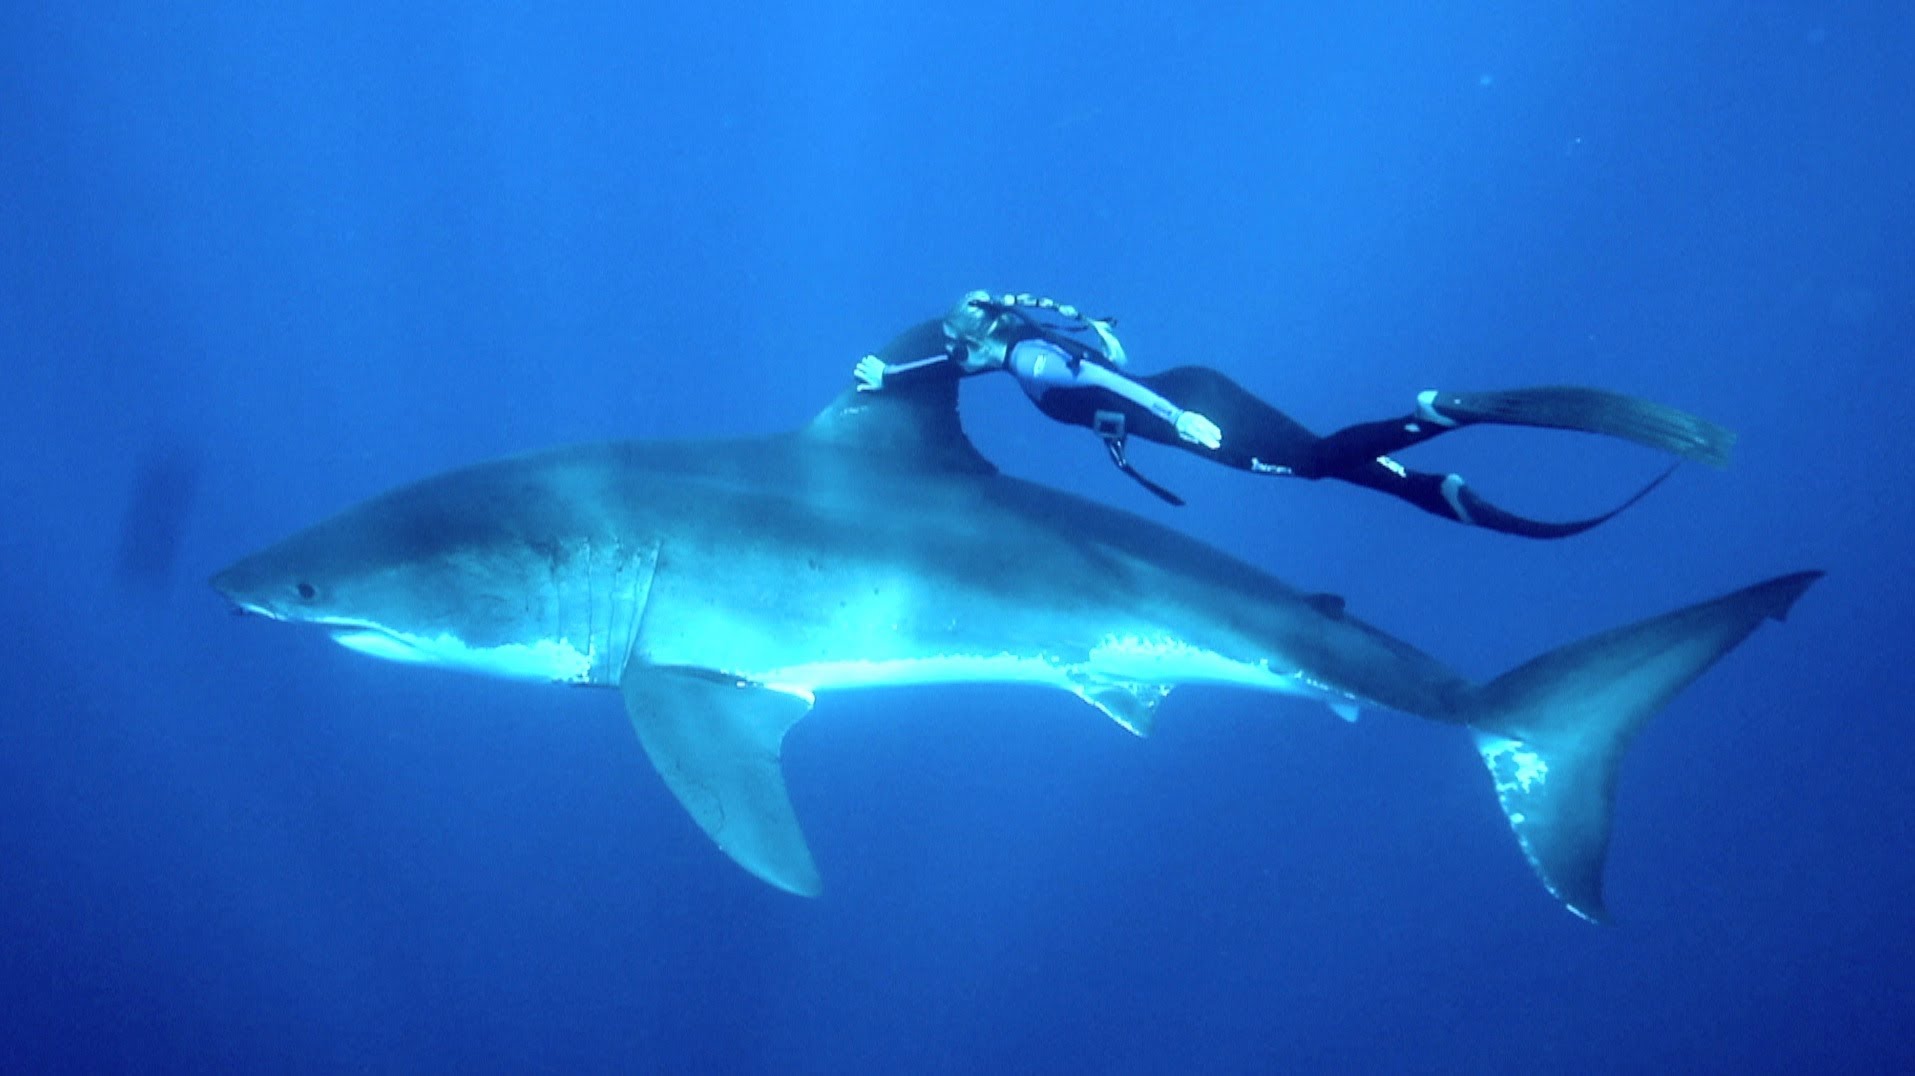 Diver Ocean Ramsey “Swims with Sharks” to Promote a More Positive Image of These Animals